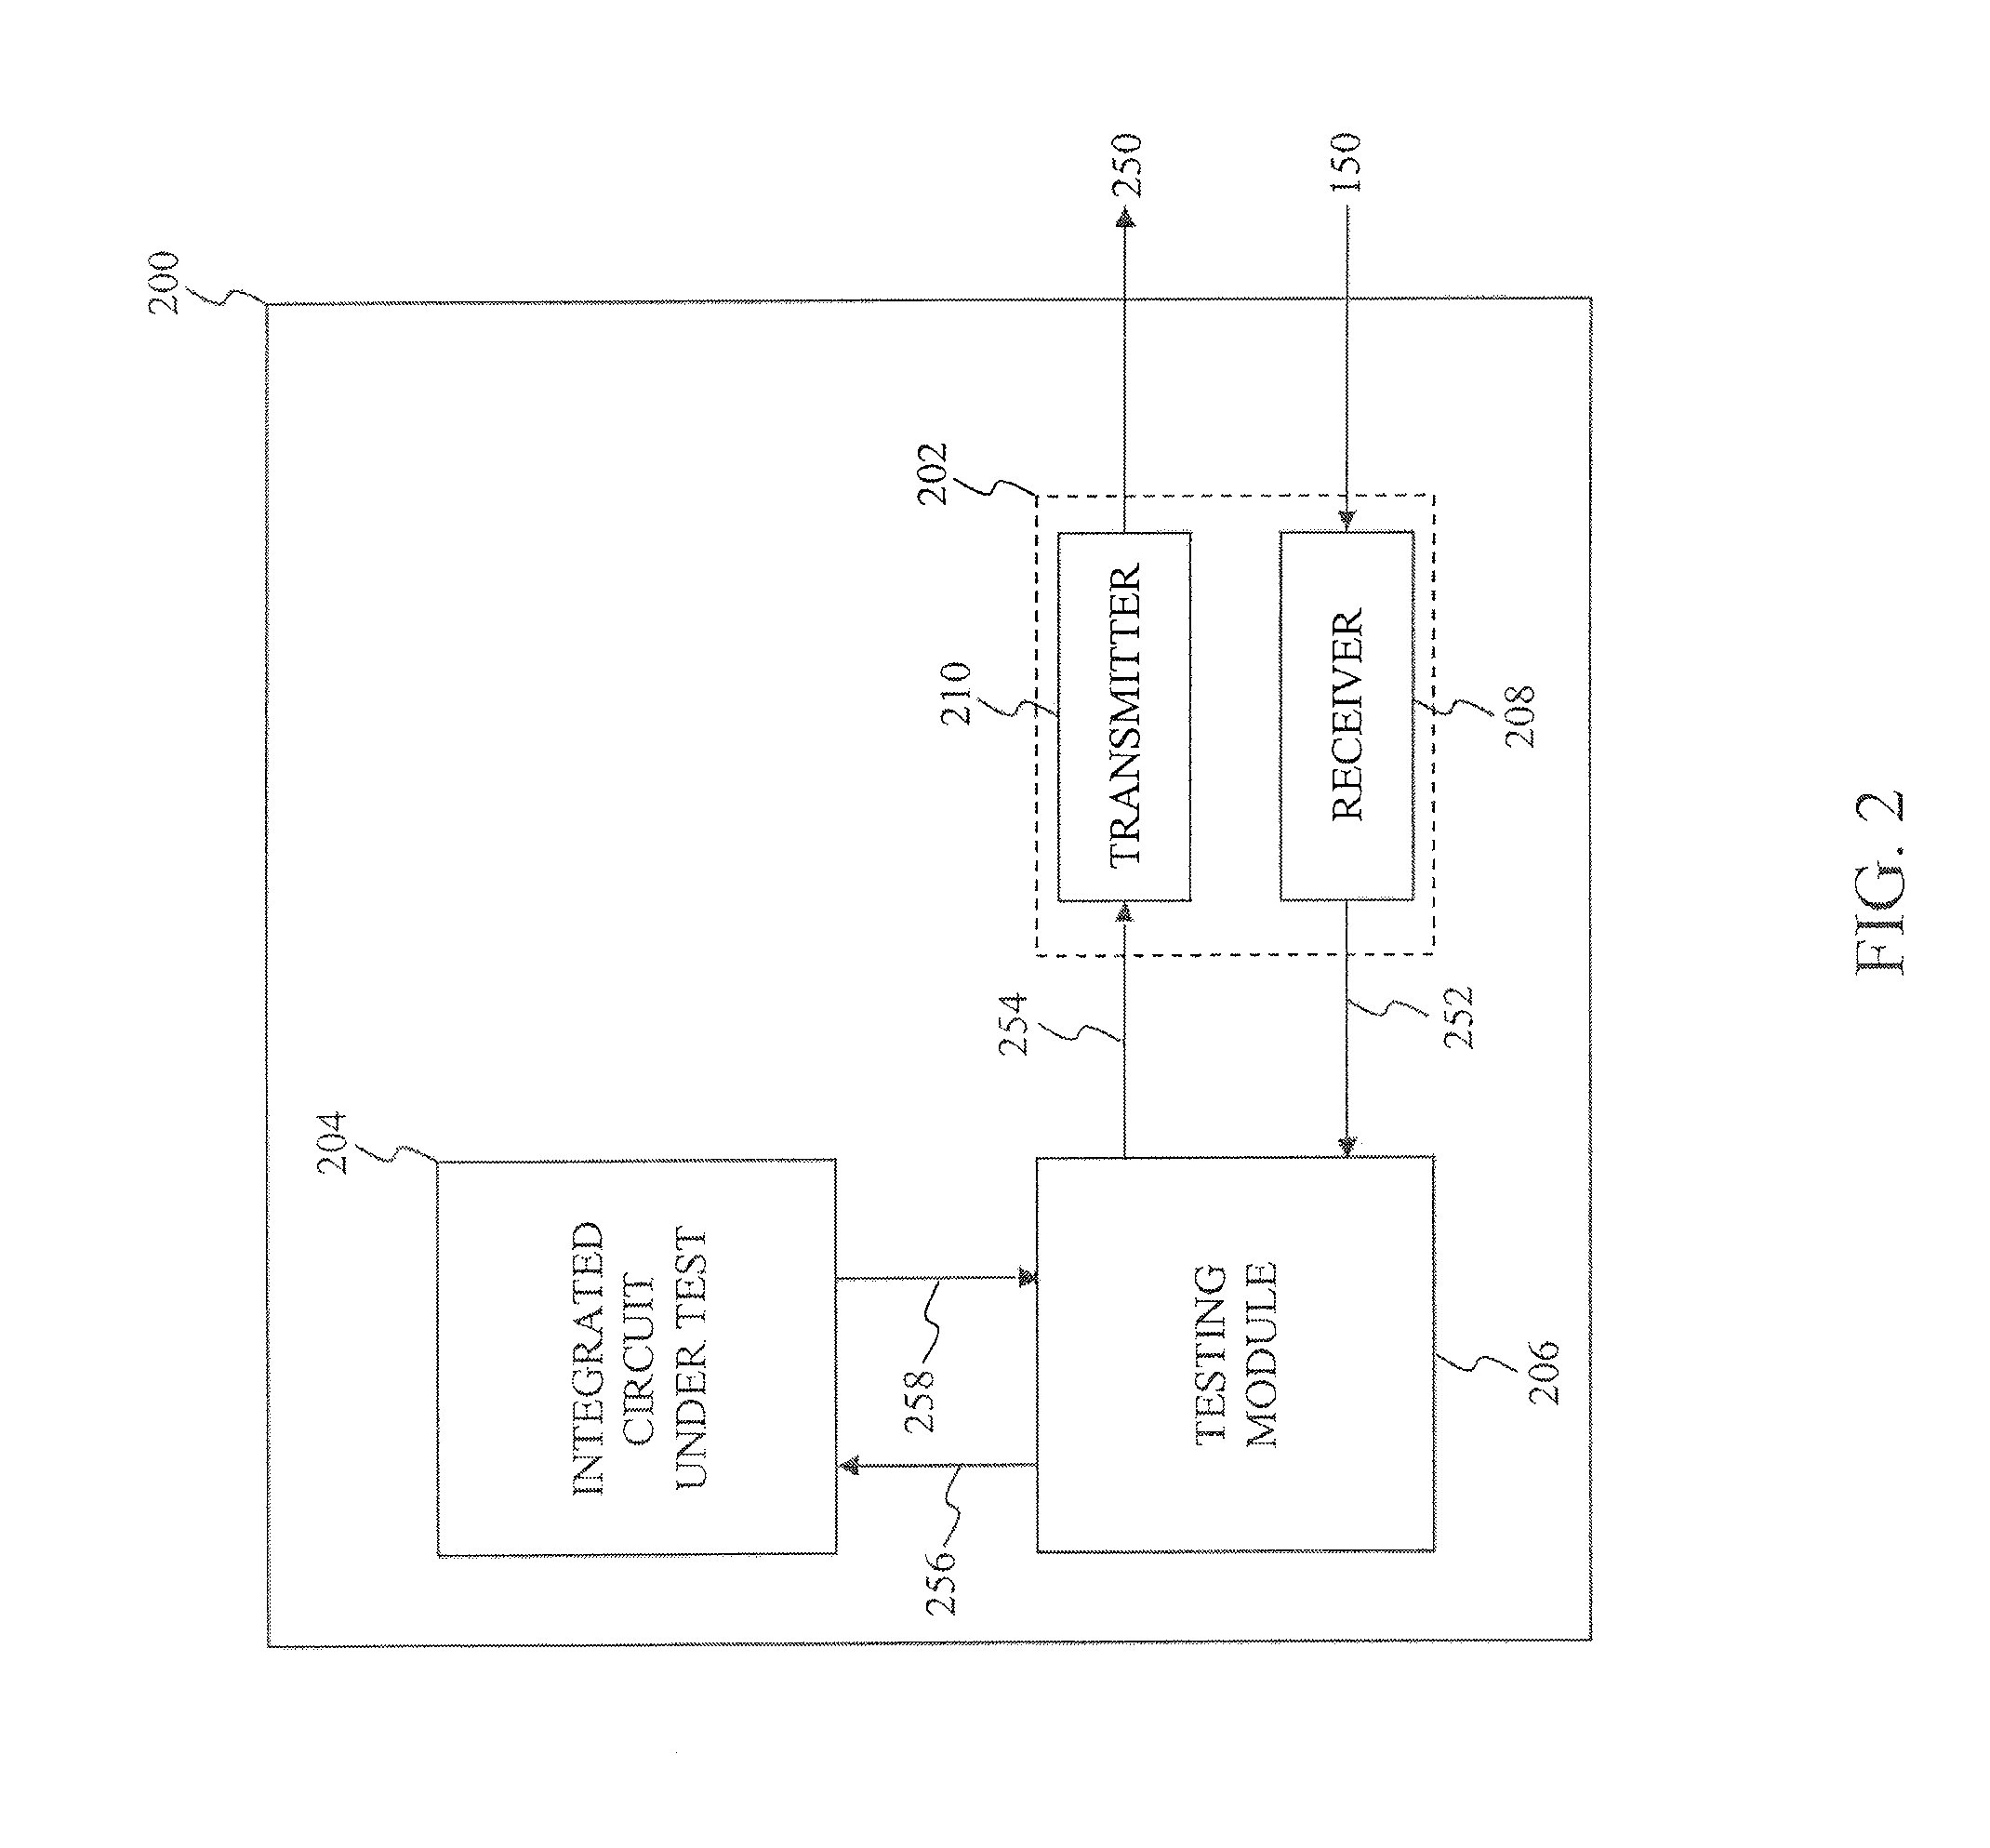 Simultaneous Testing of Semiconductor Components on a Wafer